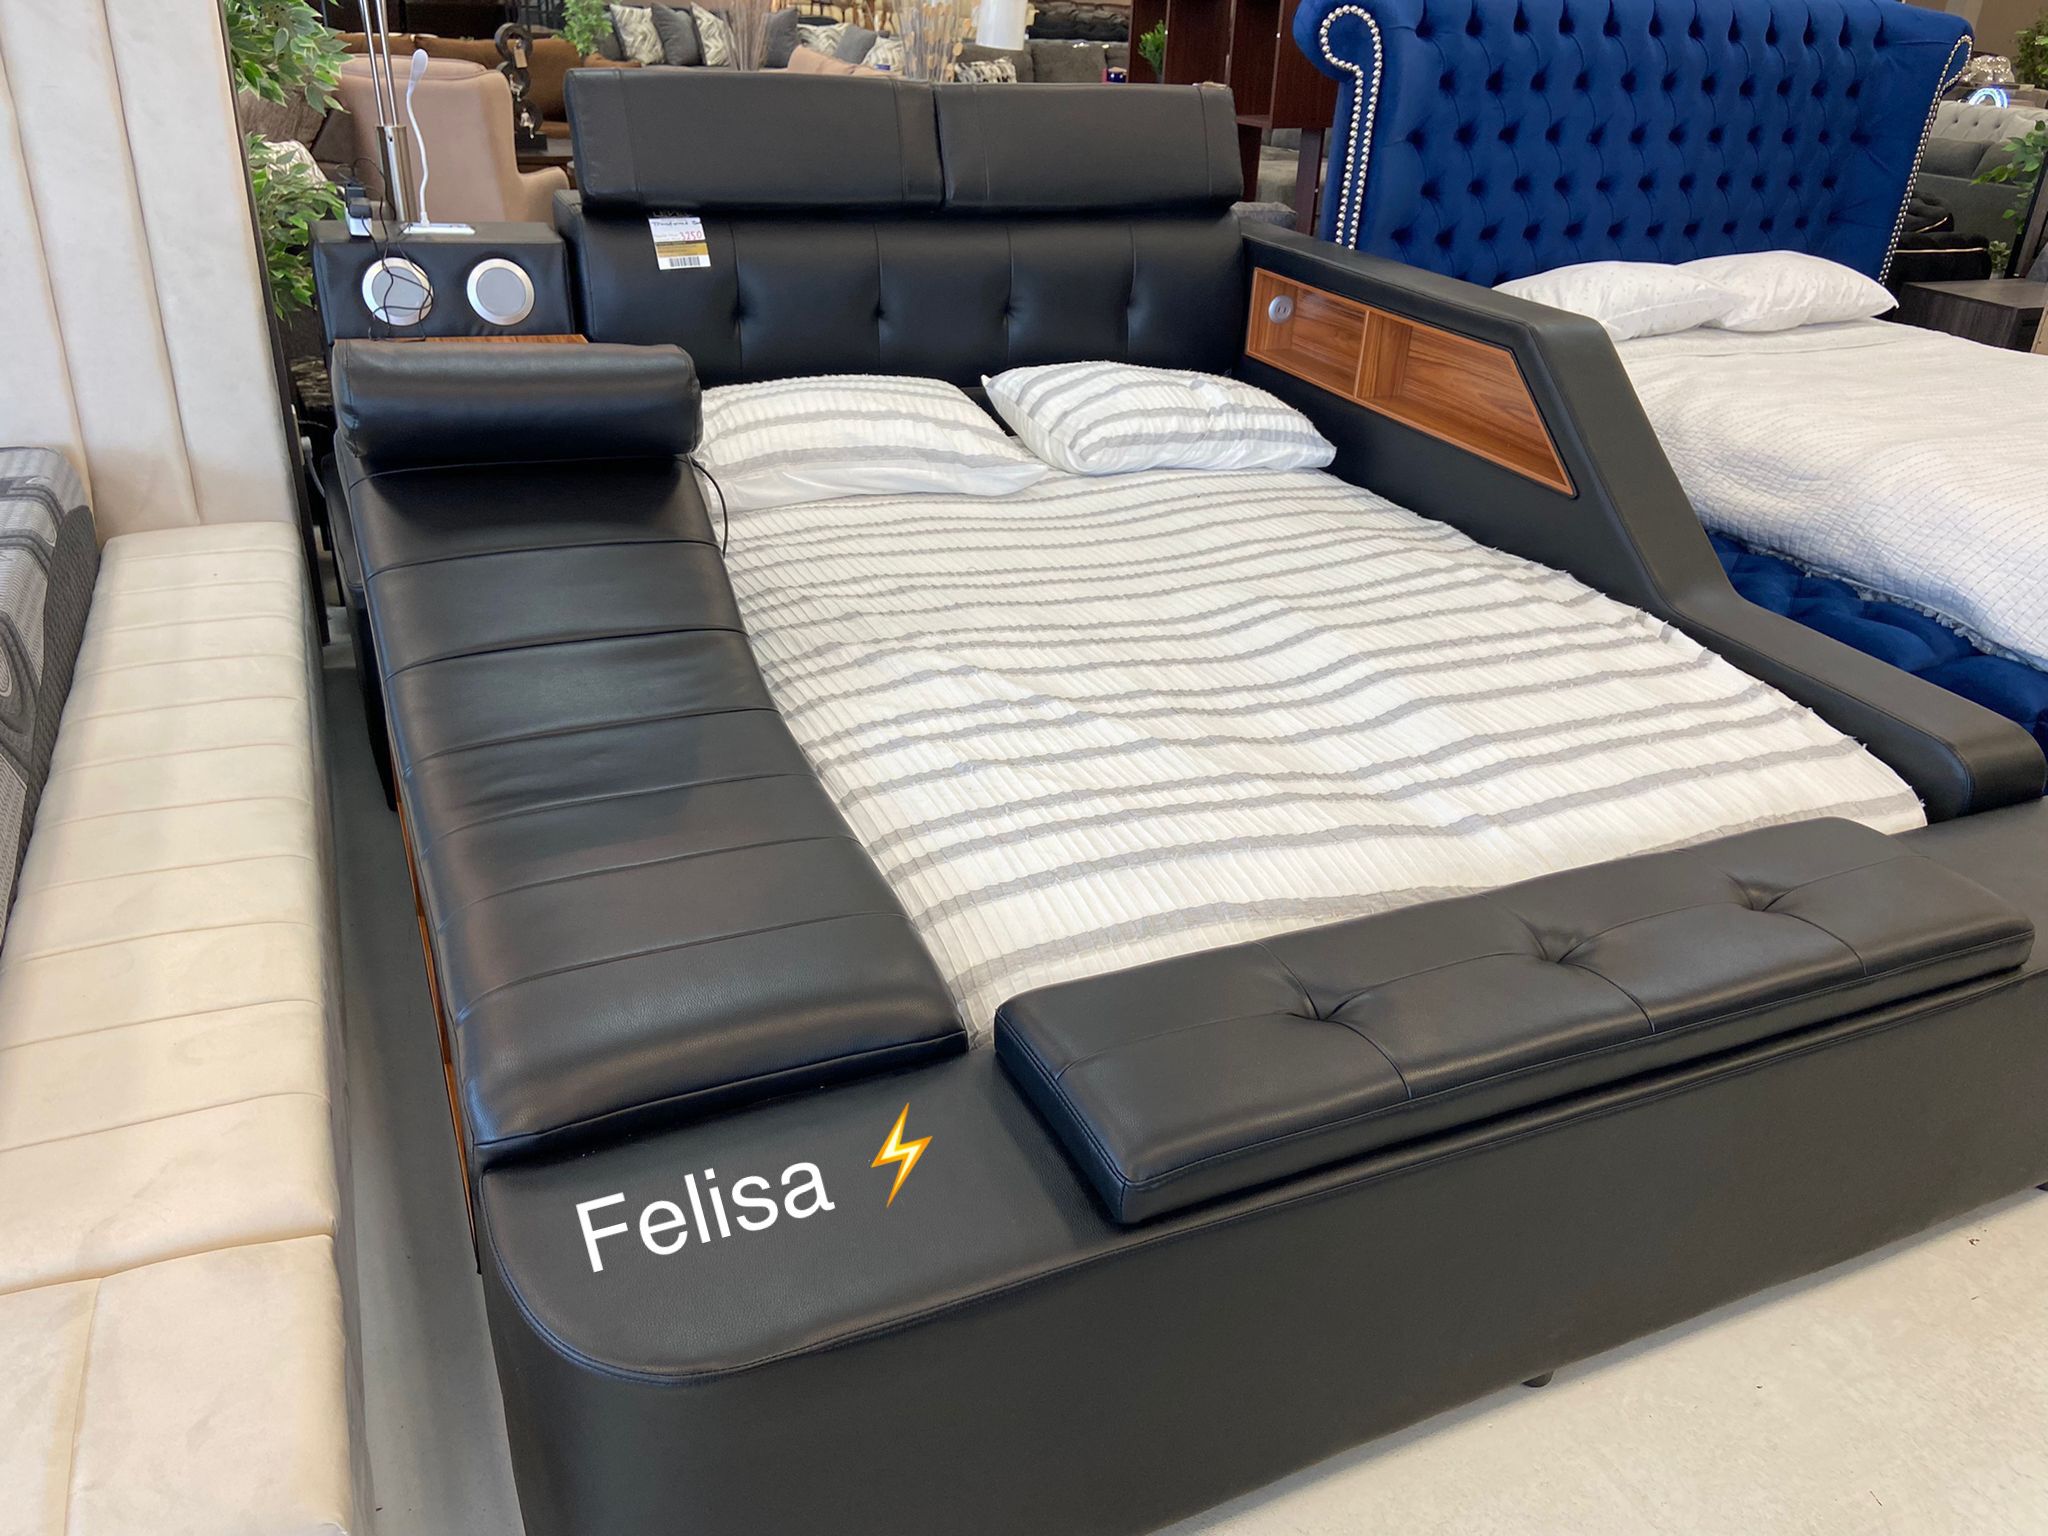 Transformer Bed in black leather, with massage chair, desk, vaul, night lamp, sound unit with usb port, and usb charging ports for cell phones 